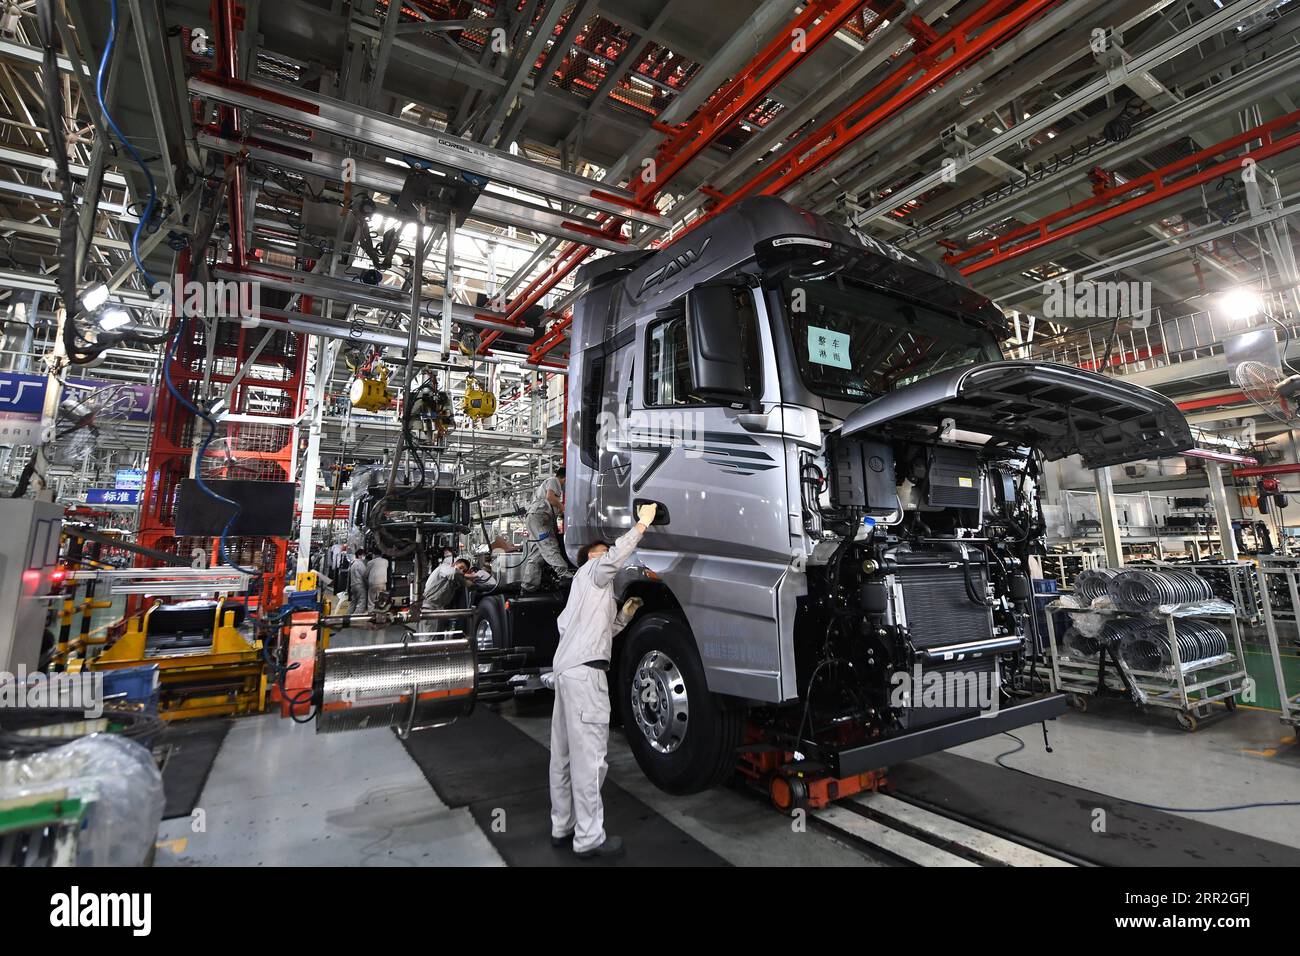 201012 -- CHANGCHUN, Oct. 12, 2020 -- Workers assemble vehicles at a factory of the First Automotive Works FAW Group Co., Ltd. in Changchun, capital of northeast China s Jilin Province, Sept. 23, 2020. China s leading automaker First Automotive Works FAW Group Co., Ltd. sold 2,656,744 vehicles in the first three quarters of the year, up 8 percent year on year, according to corporate sources.  CHINA-CHANGCHUN-FAW-SALES-GROWTH CN ZhangxNan PUBLICATIONxNOTxINxCHN Stock Photo